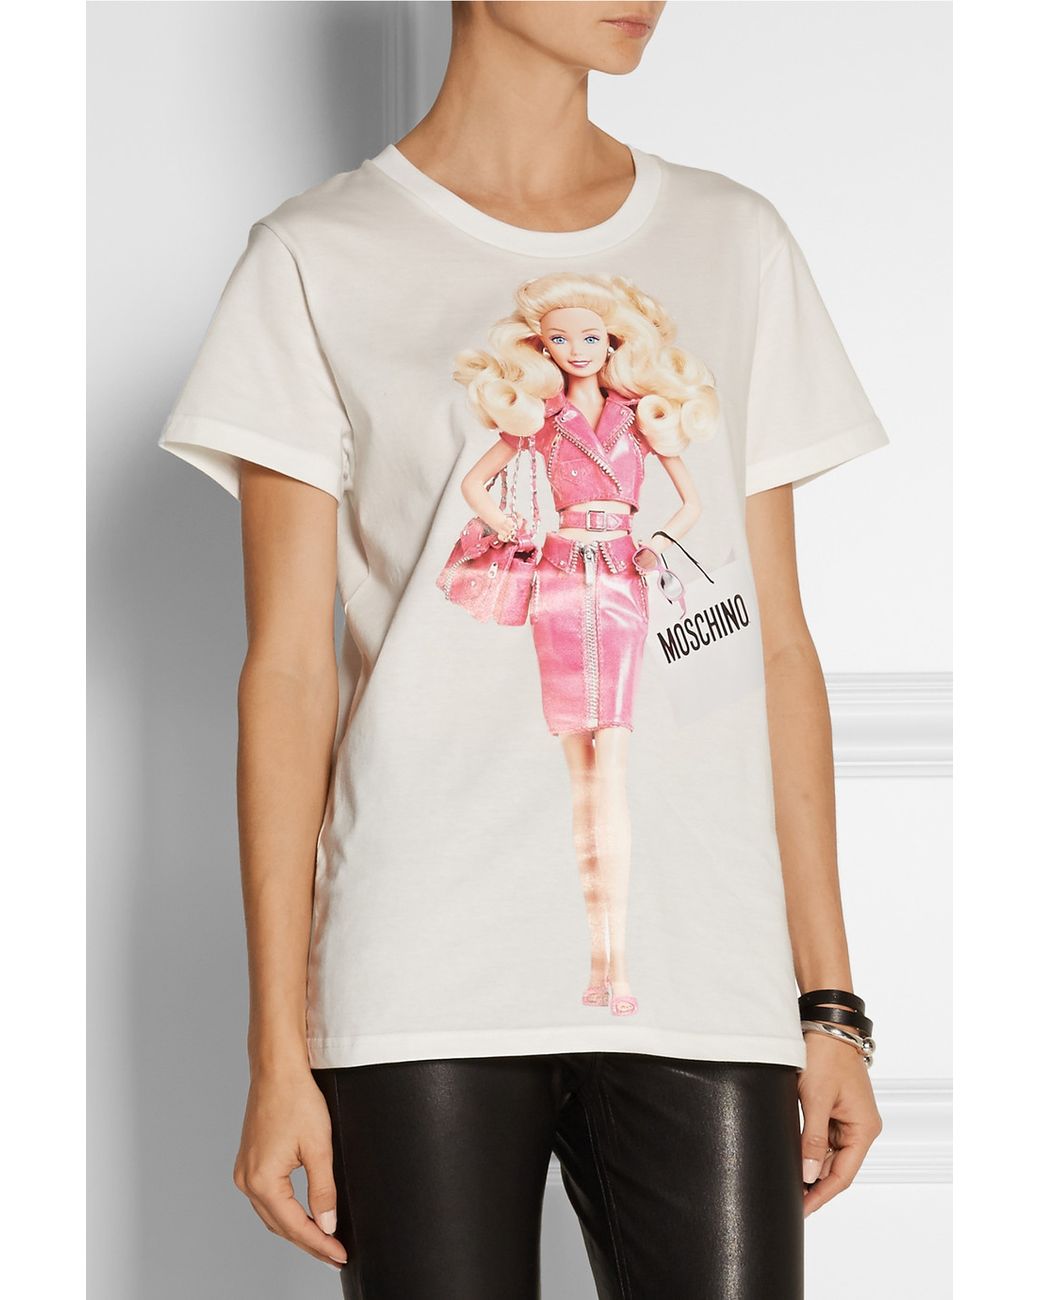 Moschino Barbie -Print Cotton-Jersey T-Shirt in White | Lyst UK